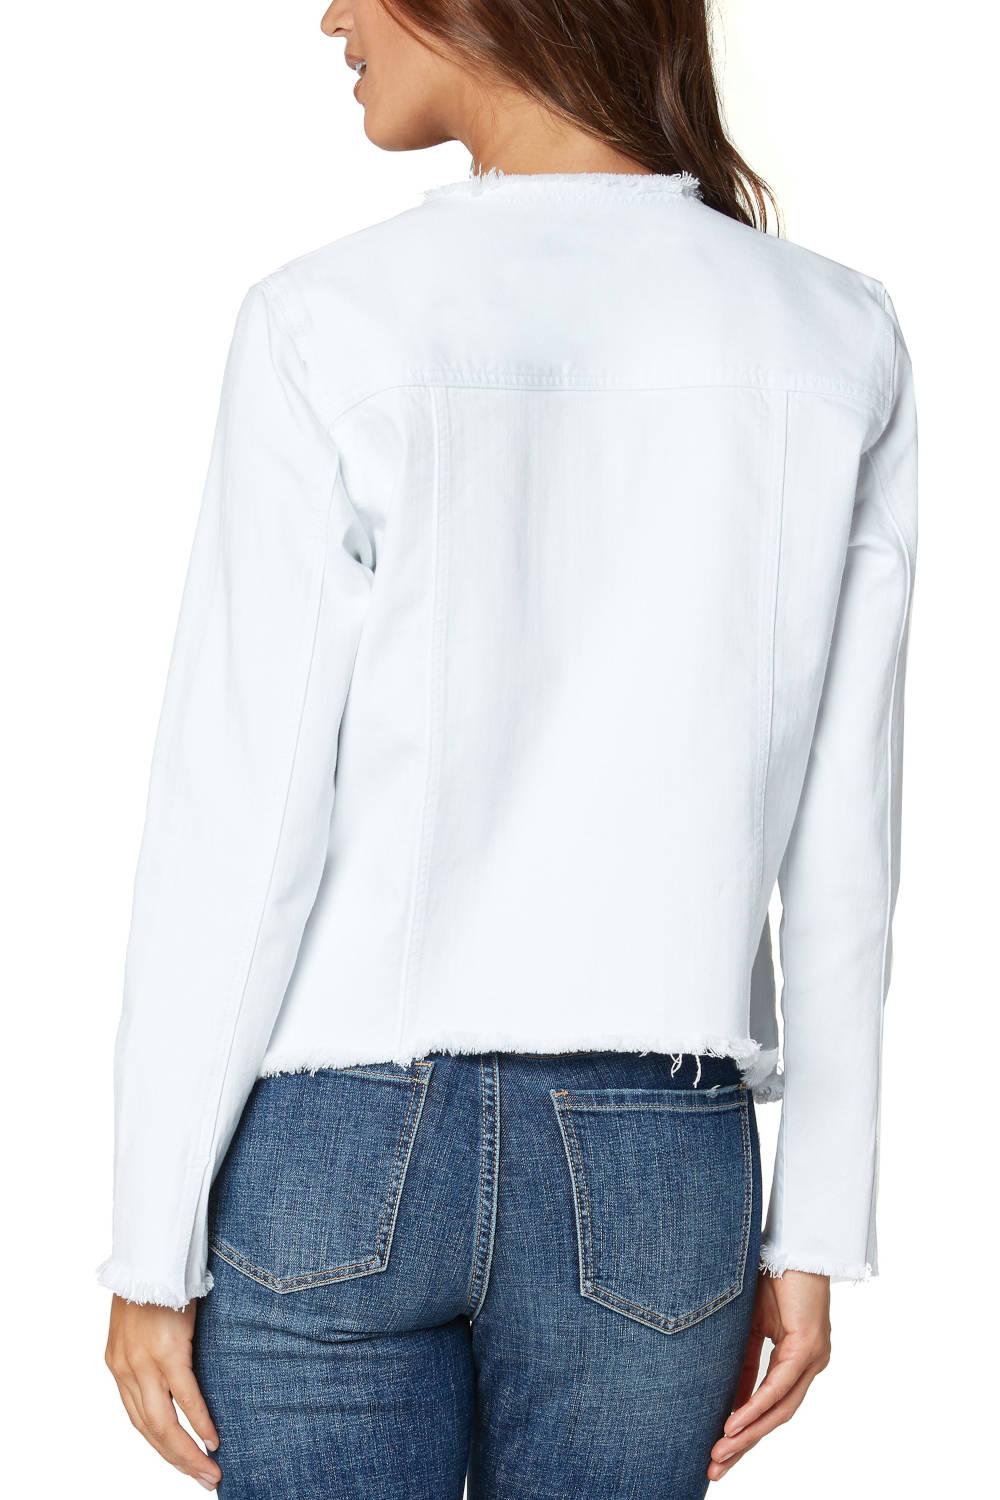 Liverpool White Classic Jean Jacket With Fray Hem - Strawberry Moon Boutique